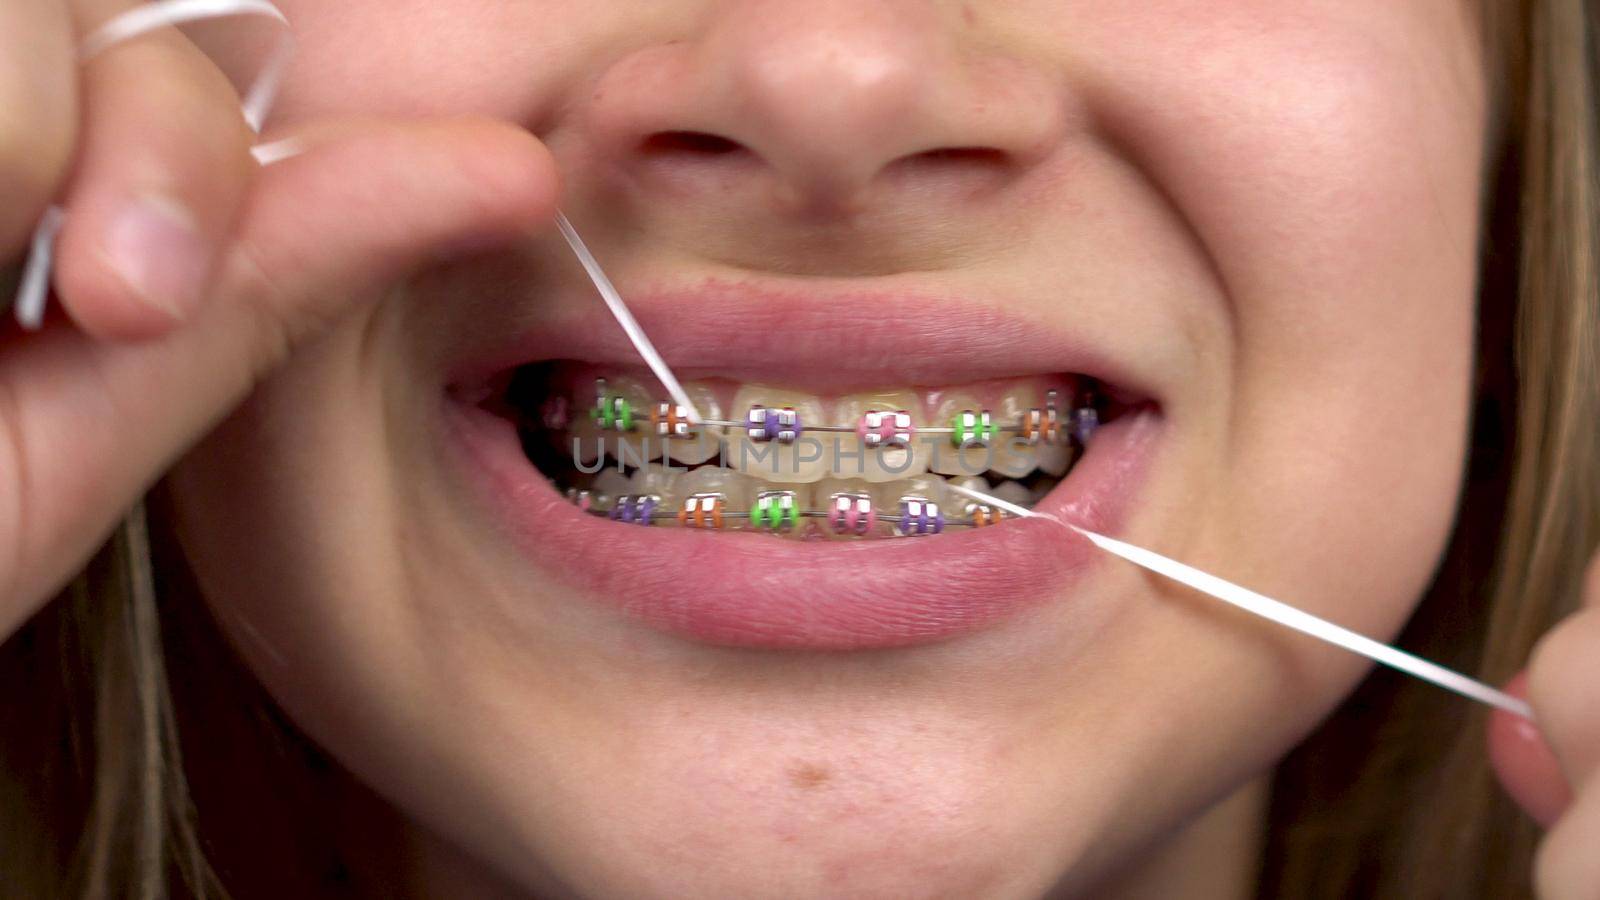 Girl with braces brushing your teeth with dental floss closeup. A girl with colored braces on her teeth keeps her teeth clean. by Puzankov